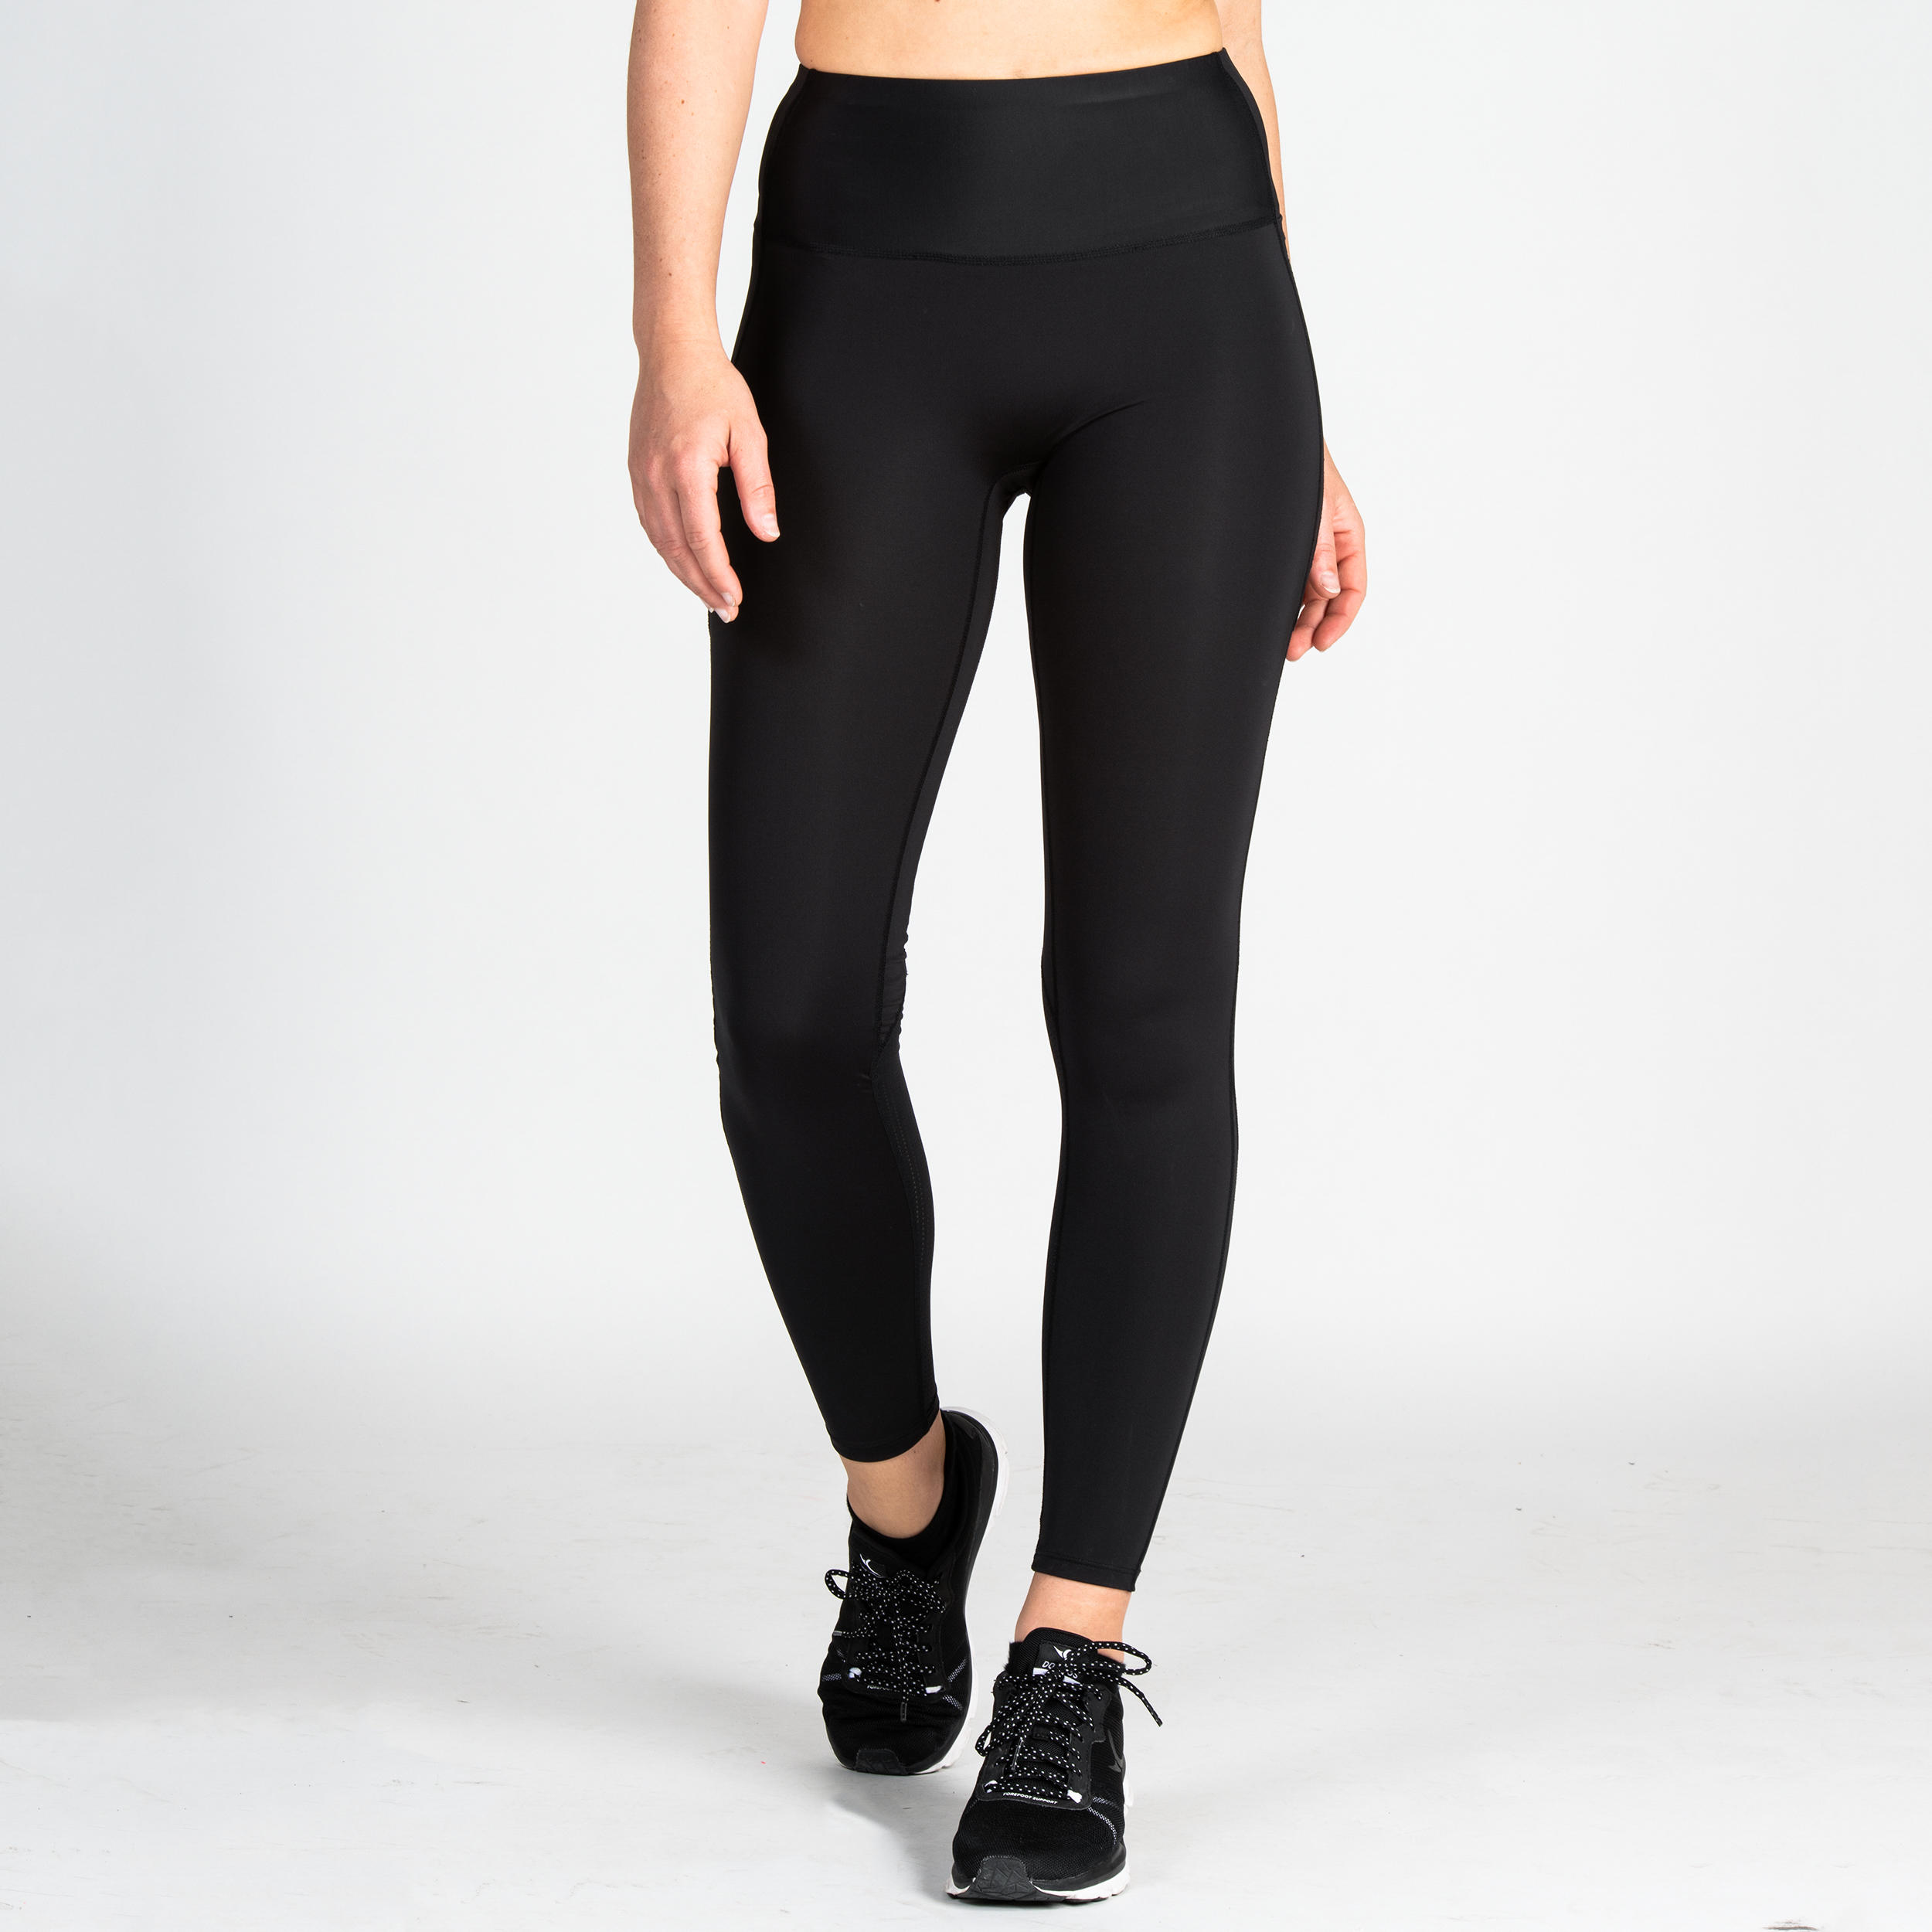 Hanes EcoSmart Women's High-Waisted Leggings with Shaping